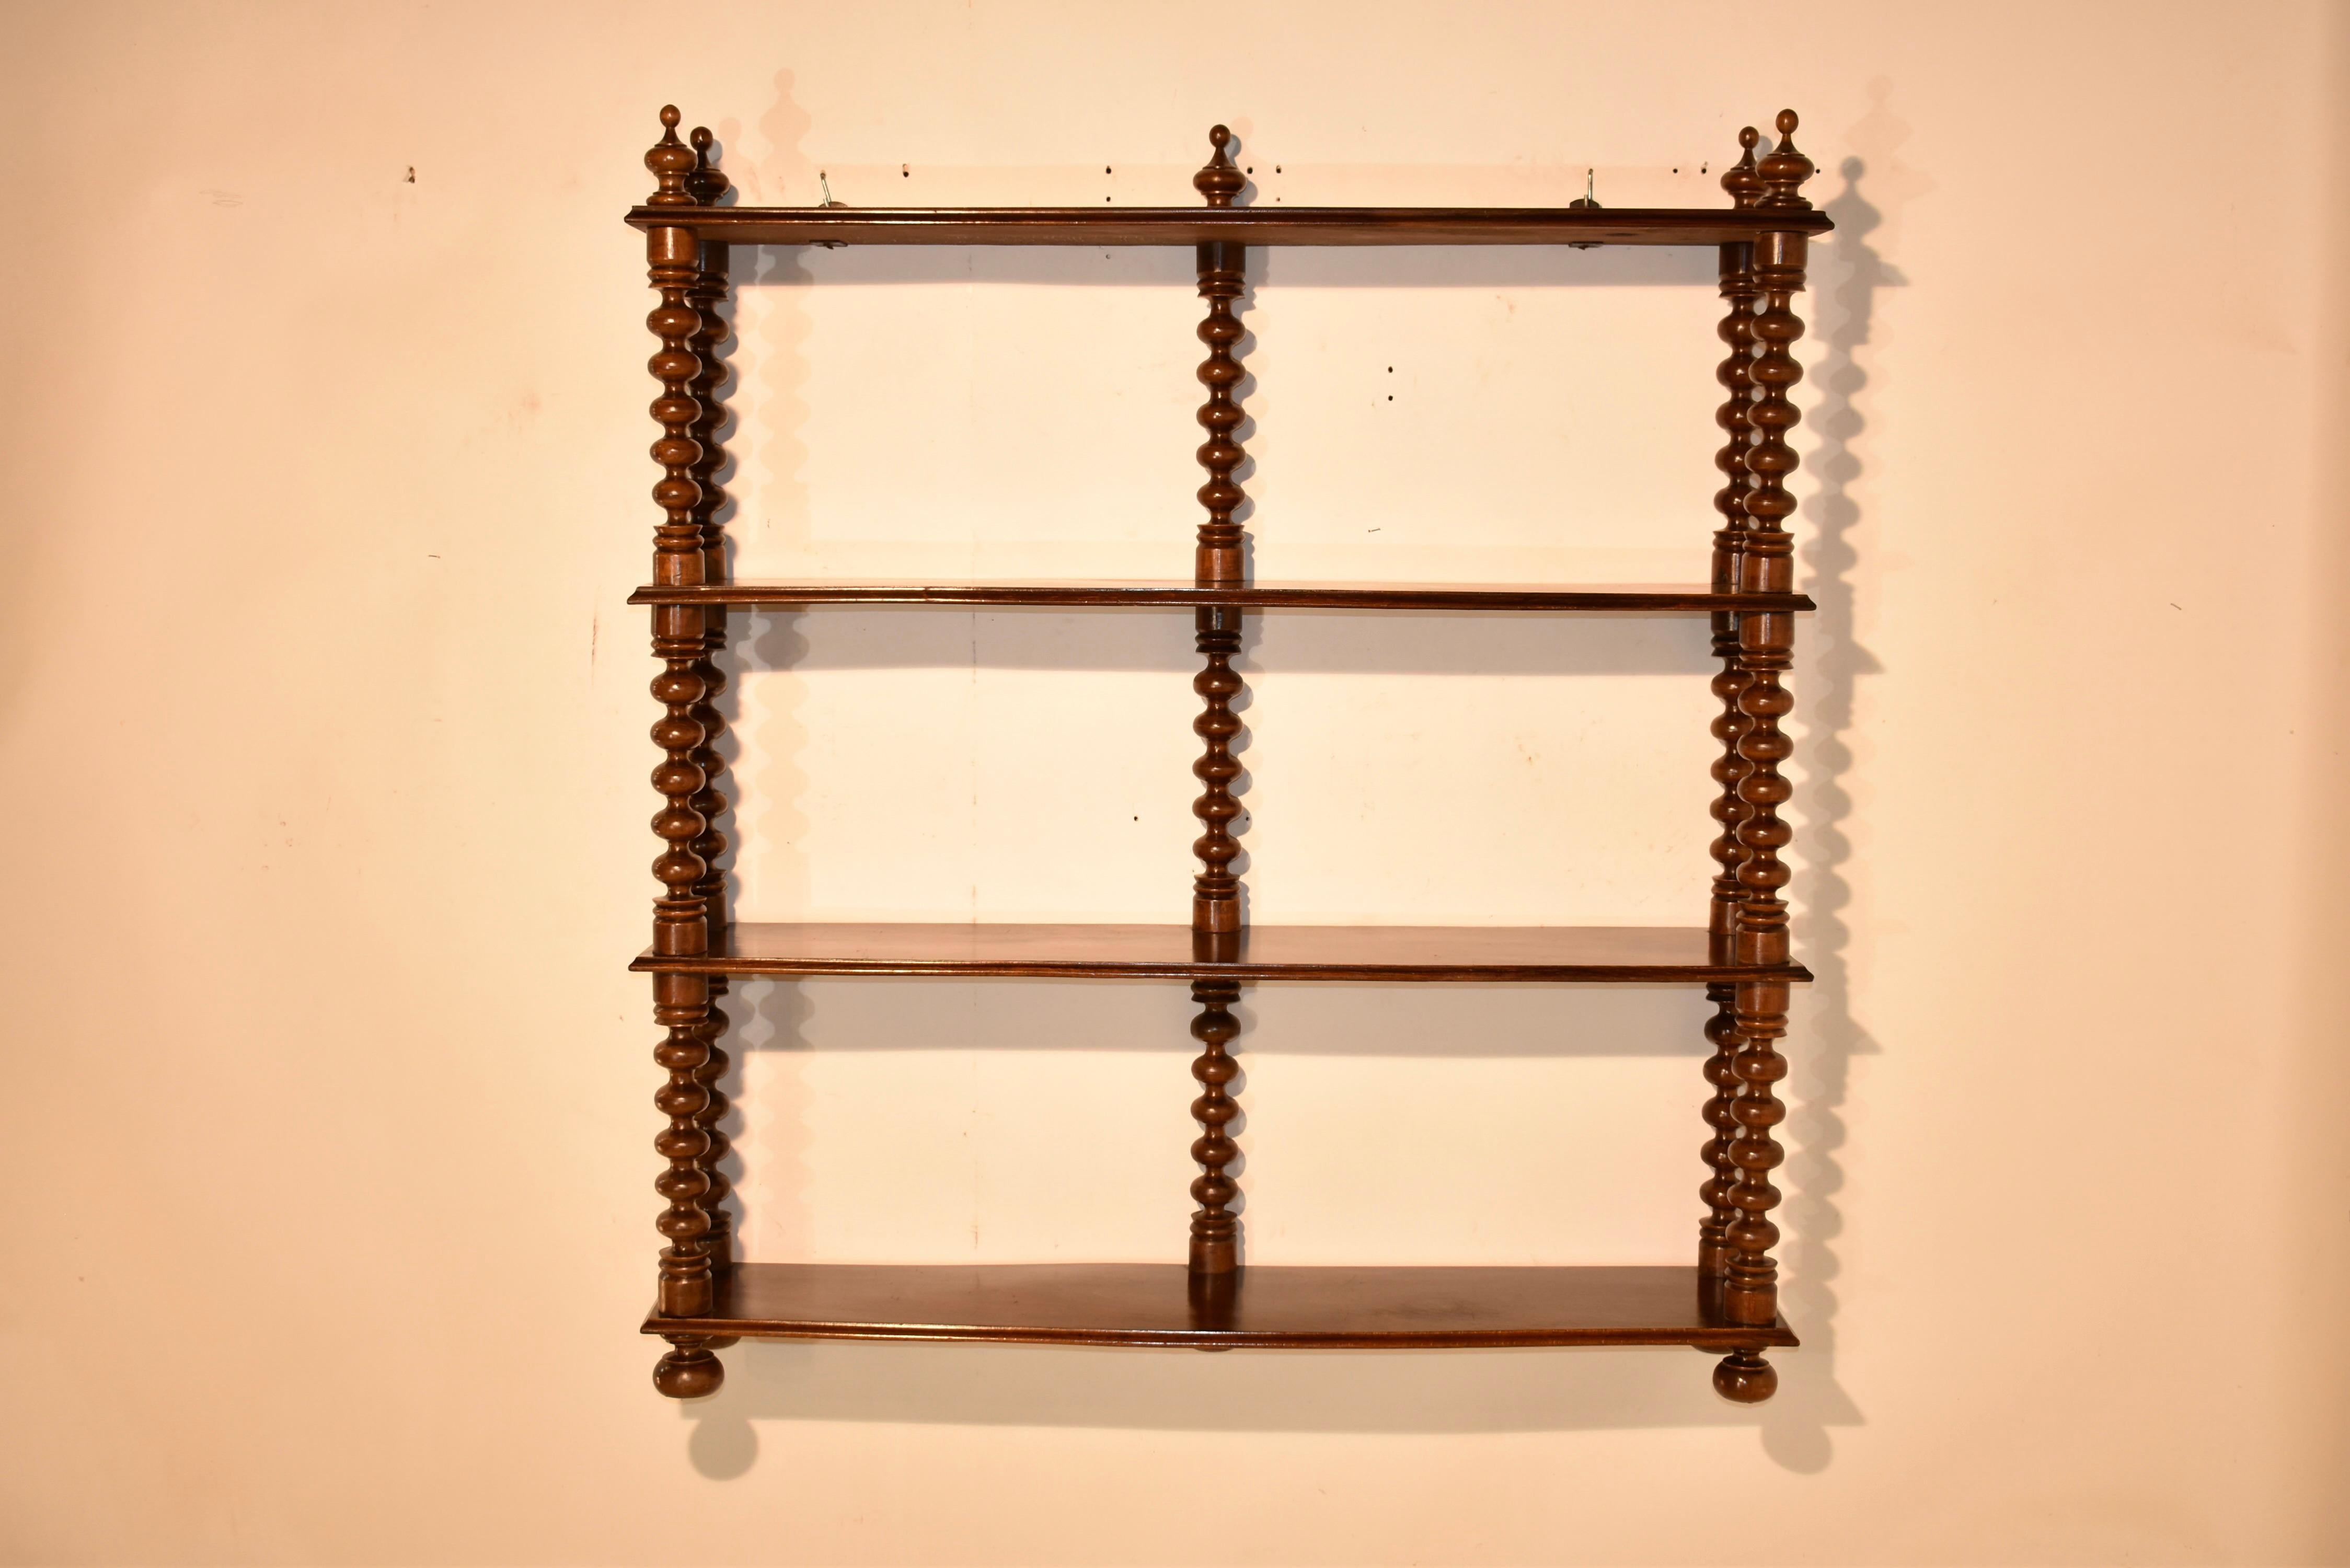 19th Century French standing shelf made from walnut. It has wonderfully hand turned finials at the top of the piece, over three shelves, all separated by hand turned shelf supports in a bobbin pattern. The piece is supported on lovely hand turned